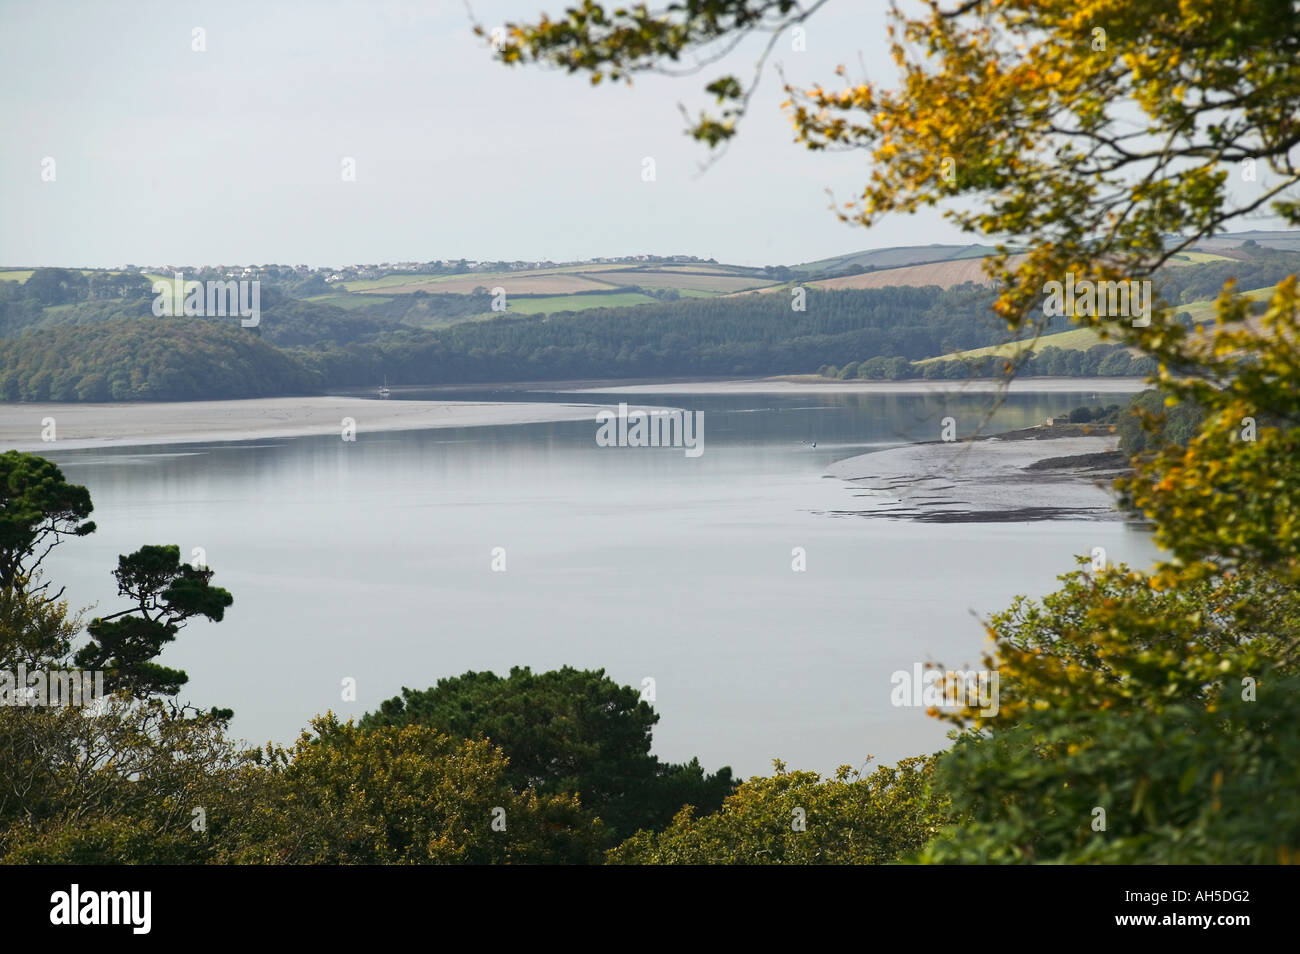 A view of the River Lynher from Antony Torpoint Cornwall Great Britain Stock Photo